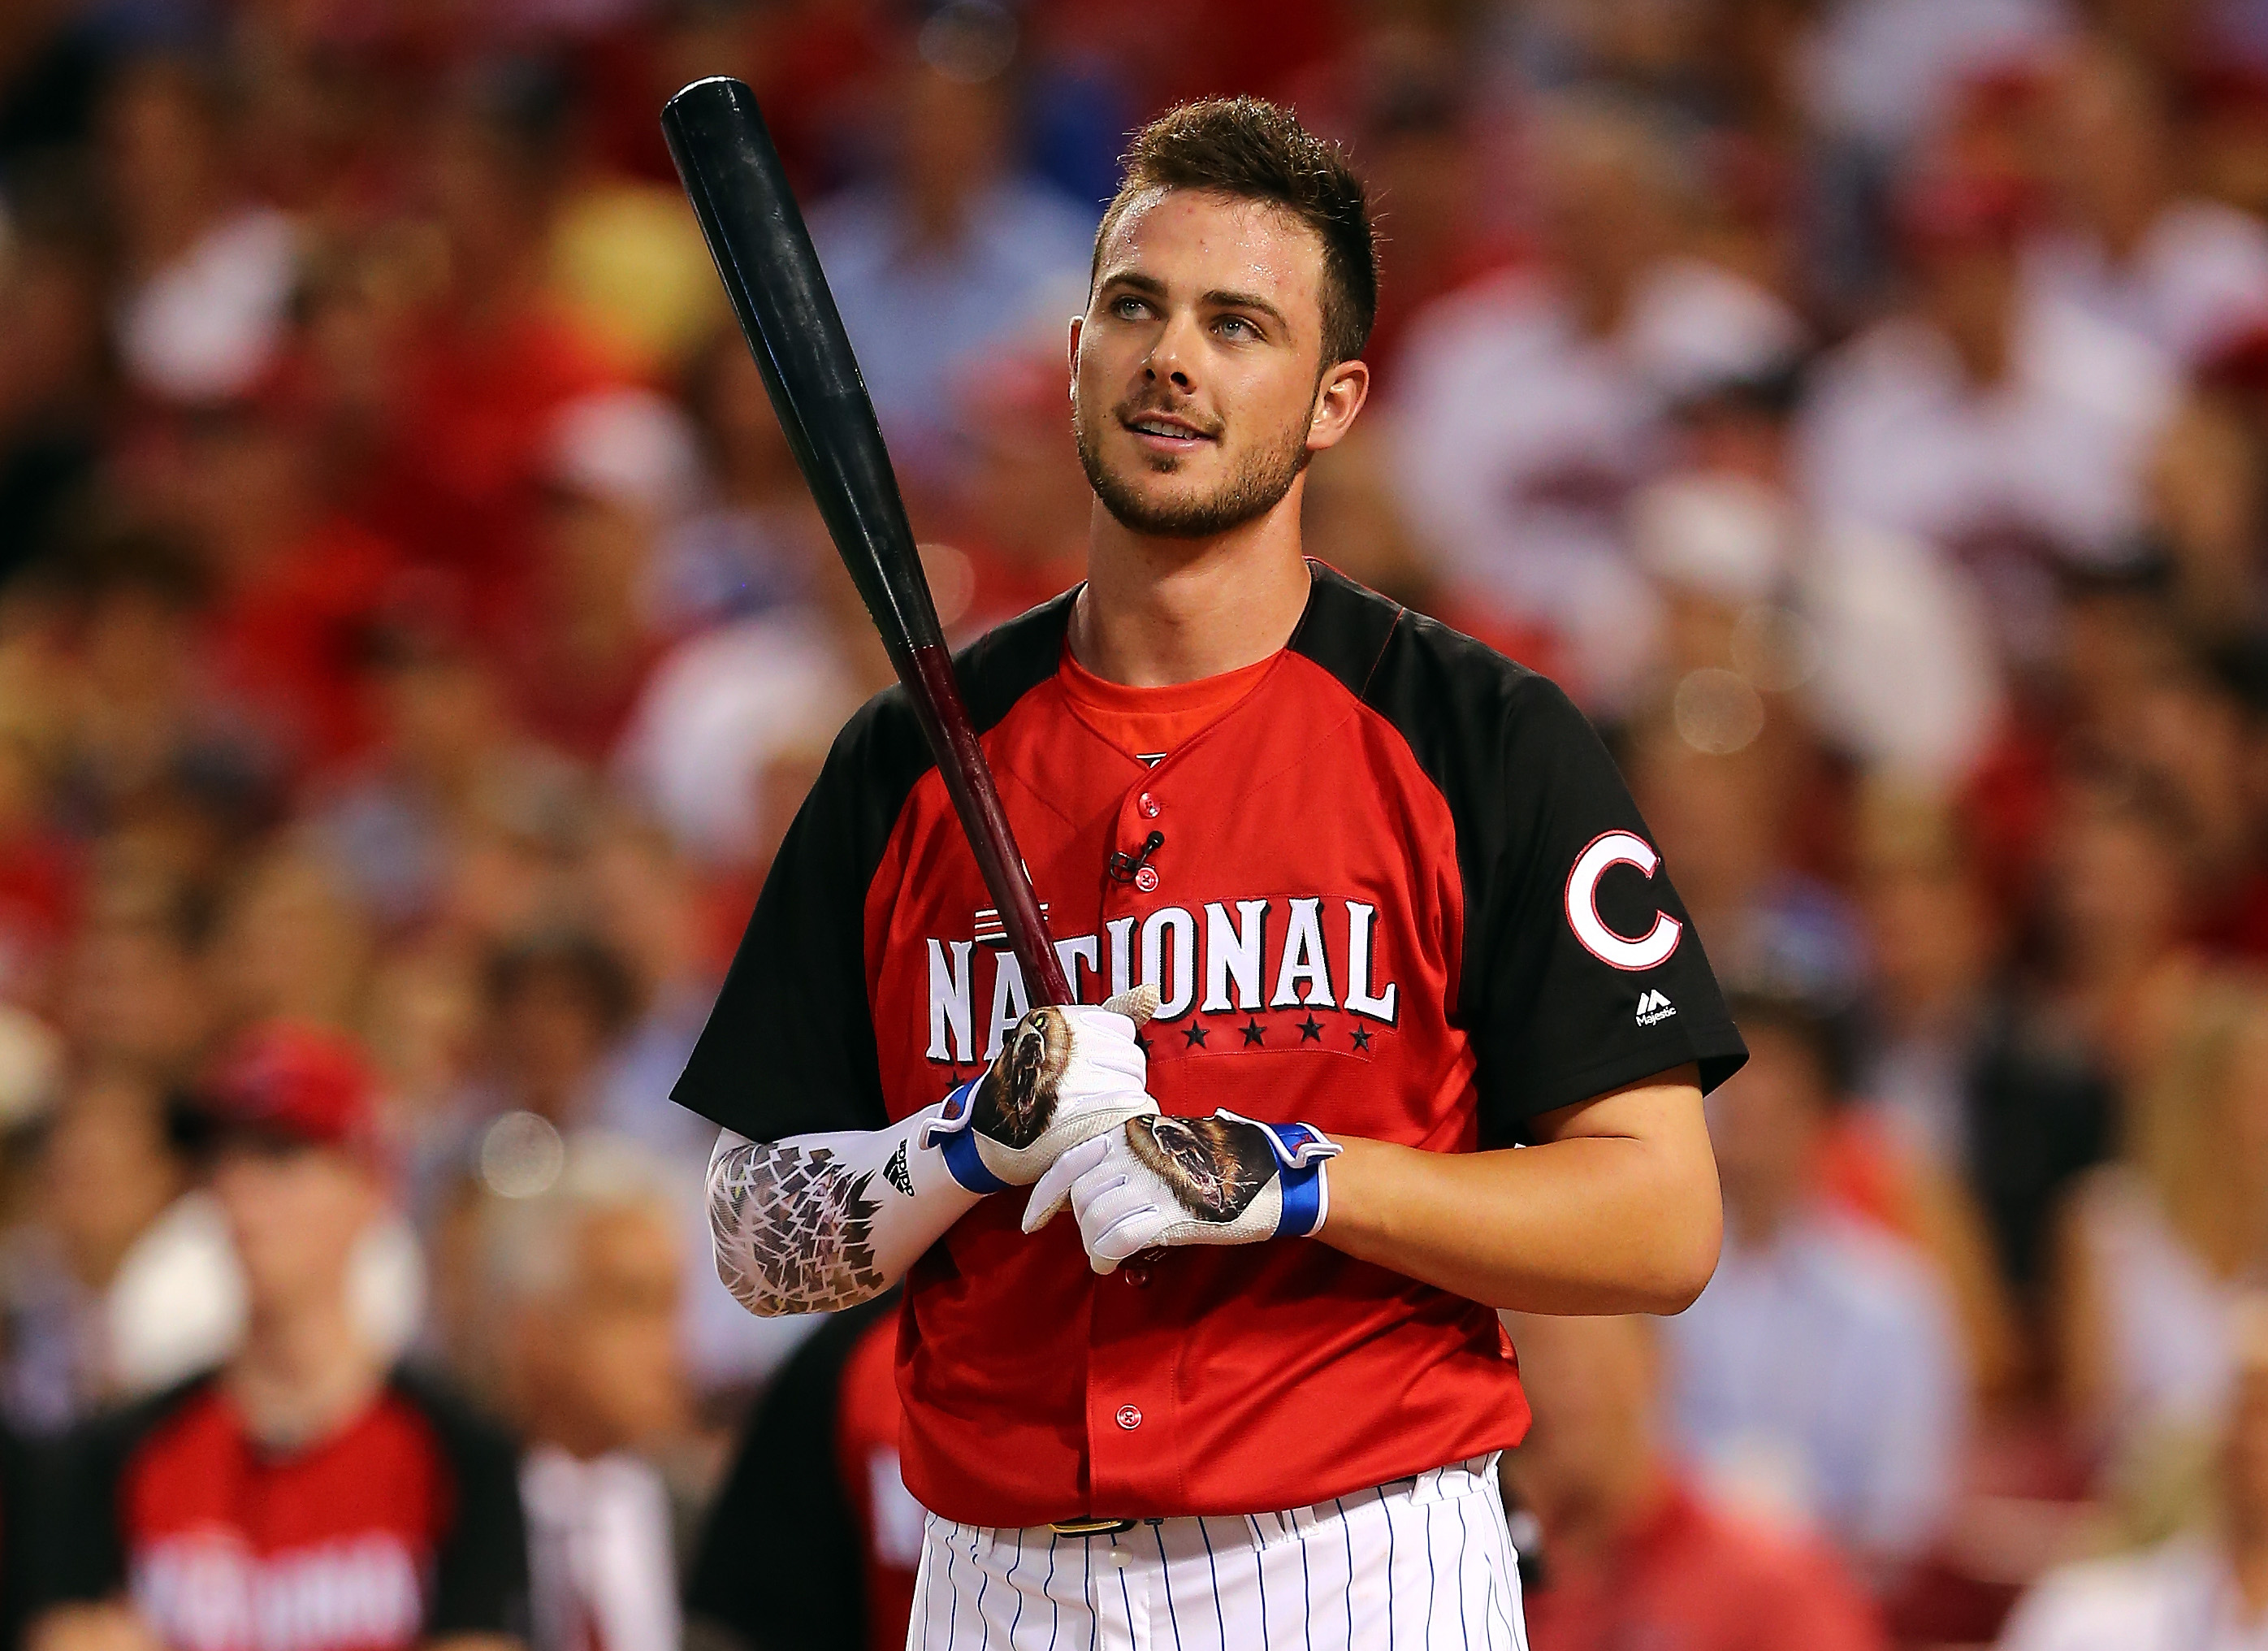 The system isn't nice enough to give us a photo of Billy McKinney, so here's his potential future teammate Kris Bryant instead.